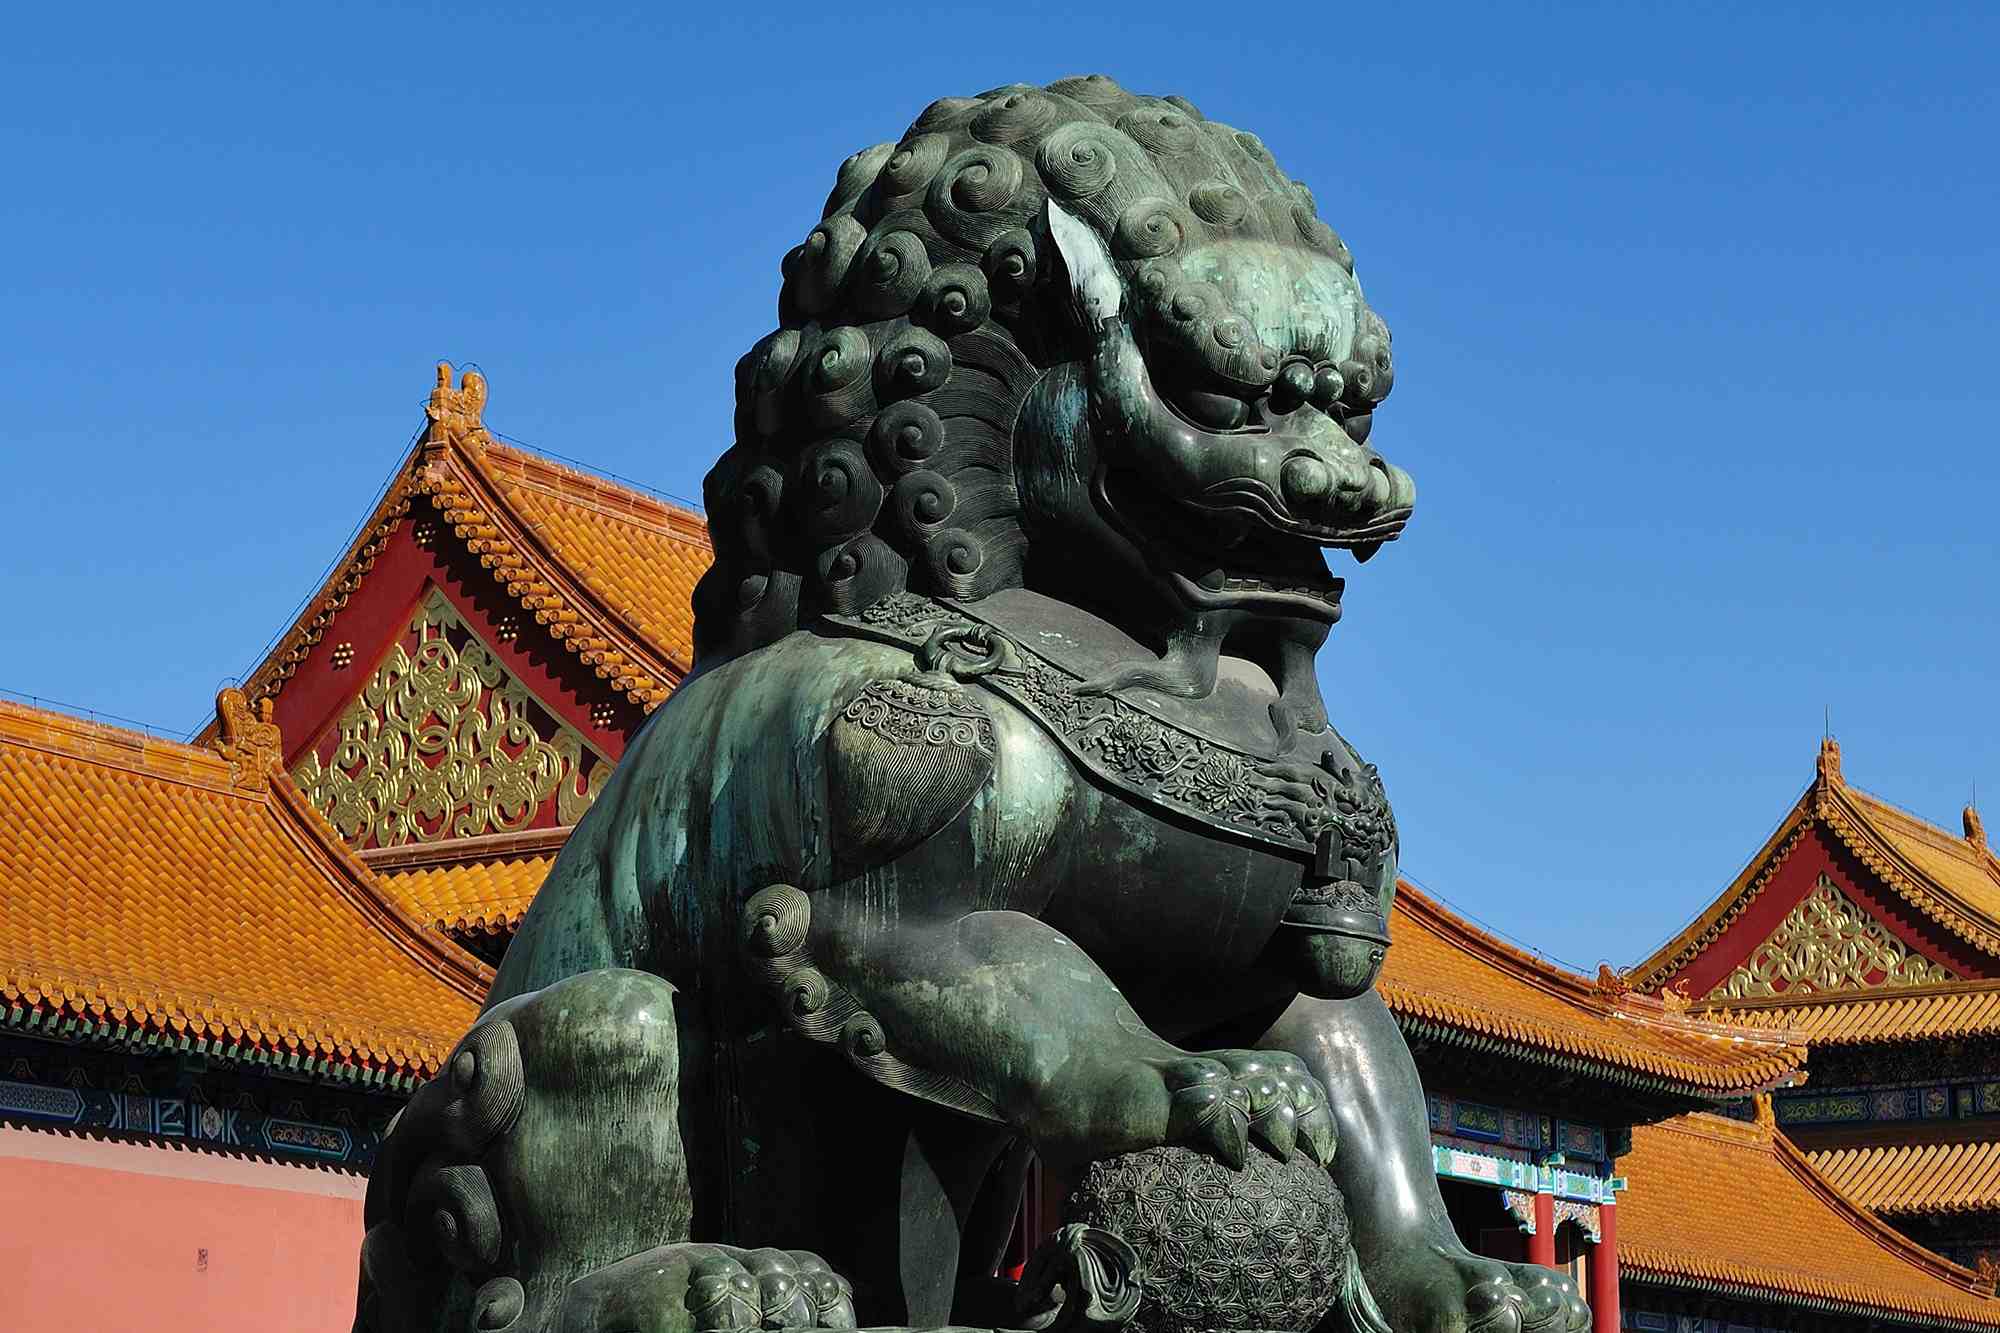 2-Day Beijing Private Tour of Tiananmen Square, Forbidden City, The temple of Heaven,Ming Tombs and Mutianyu or Badaling Great Wall